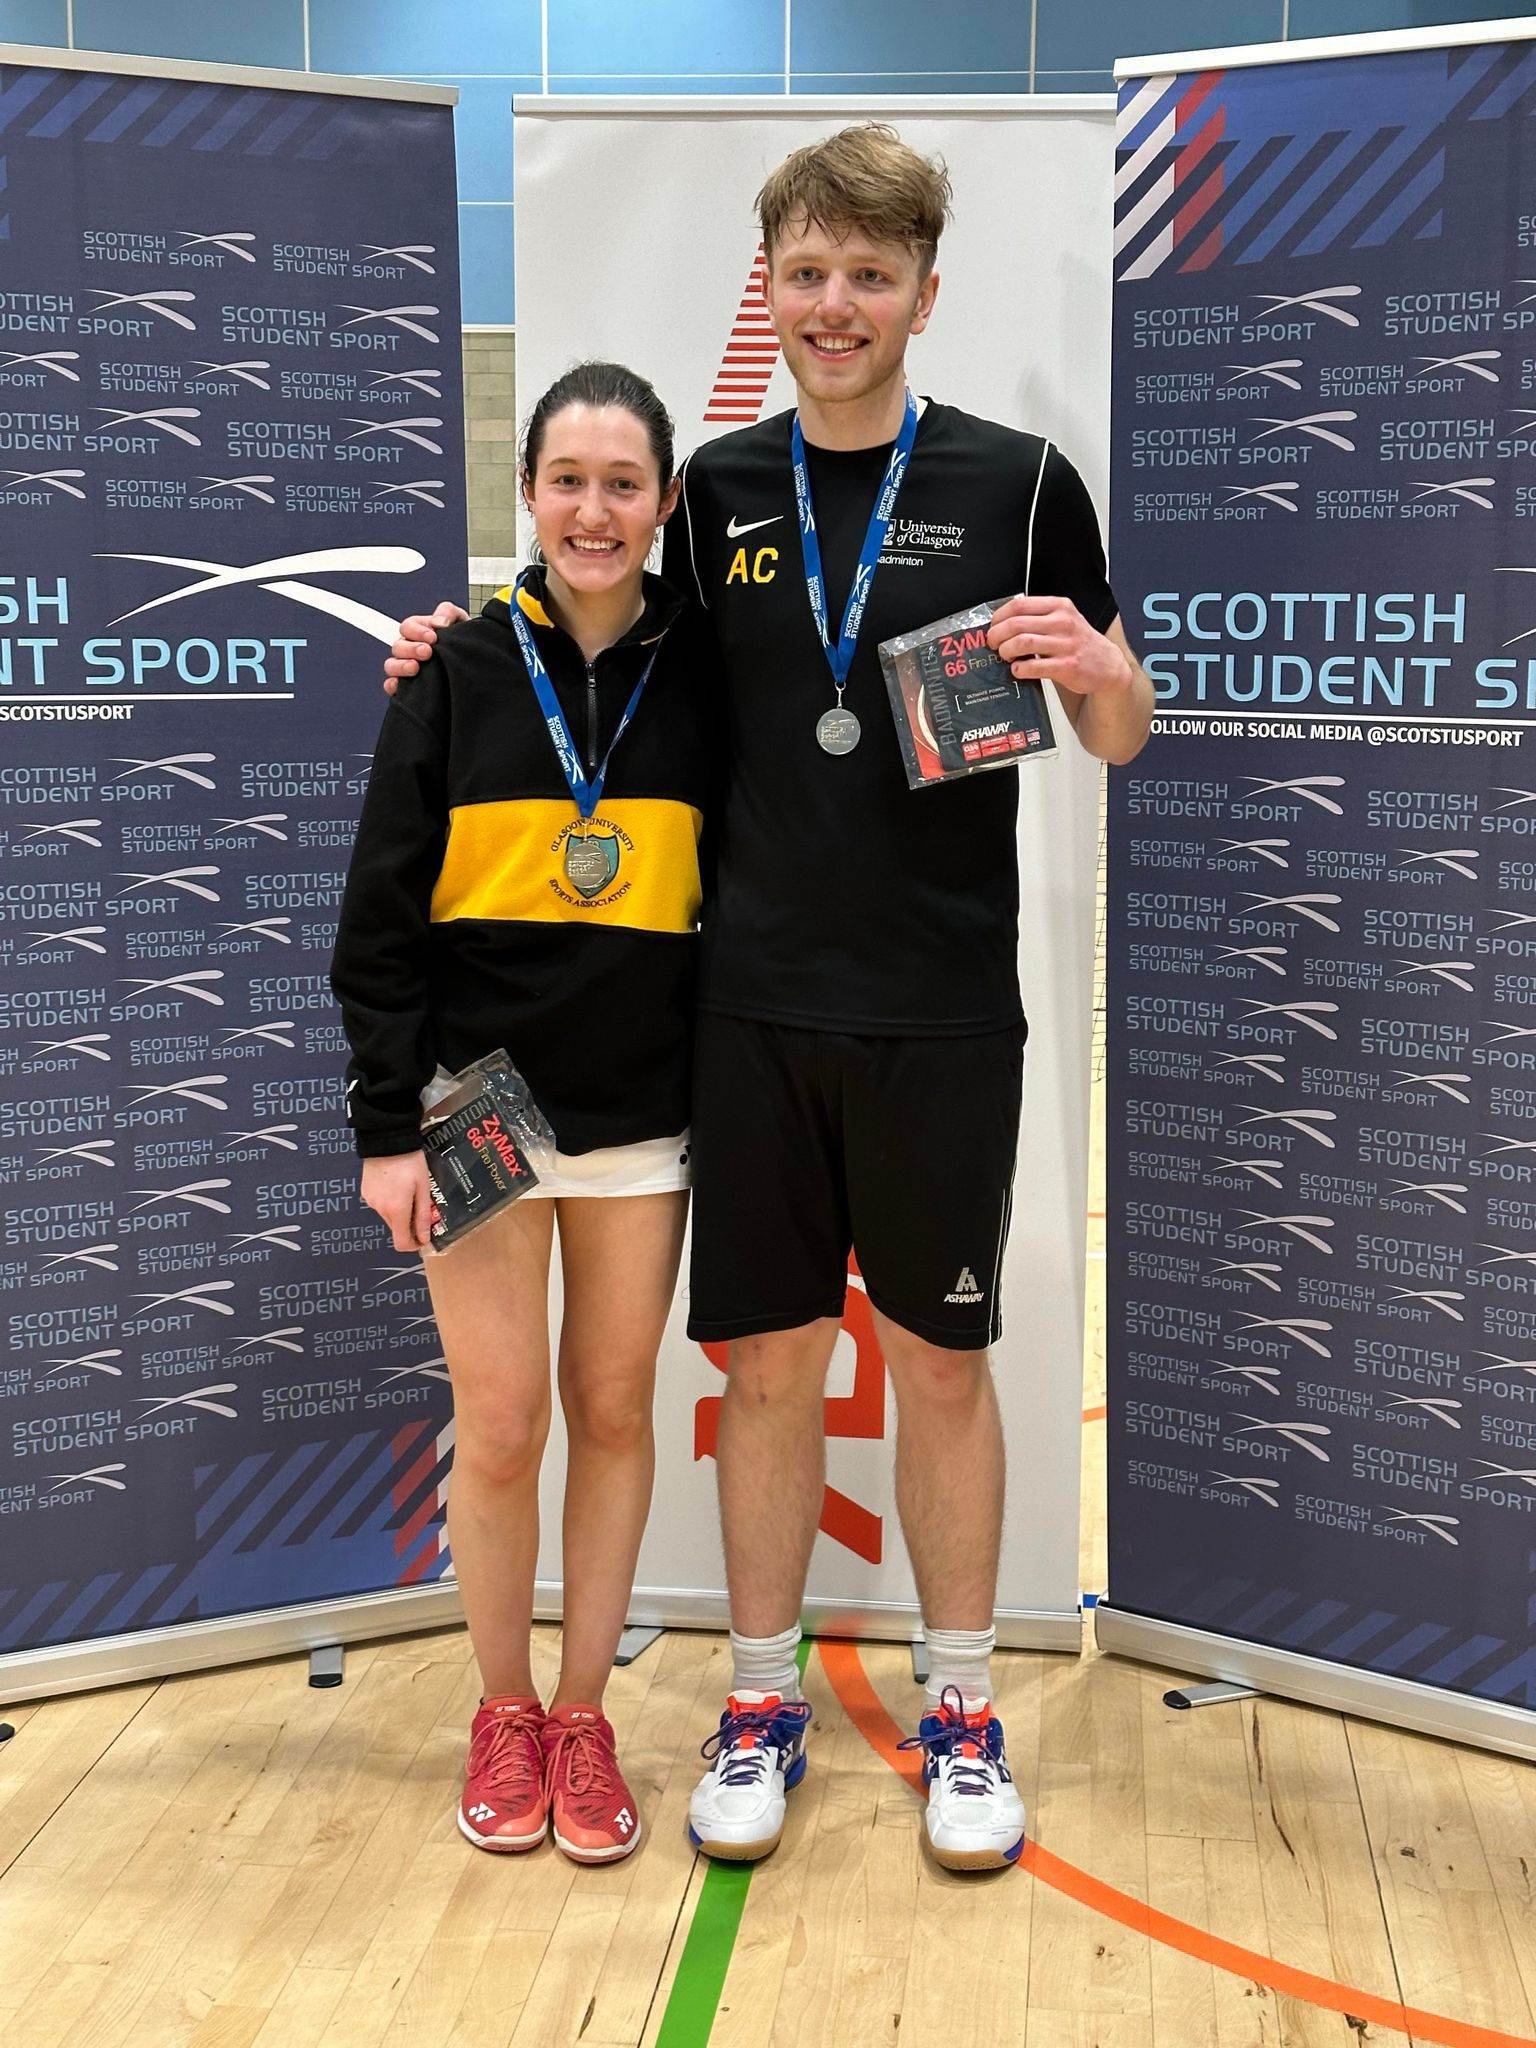 Mixed Doubles success for Glasgow at the Scottish Student Sport Badminton Championships